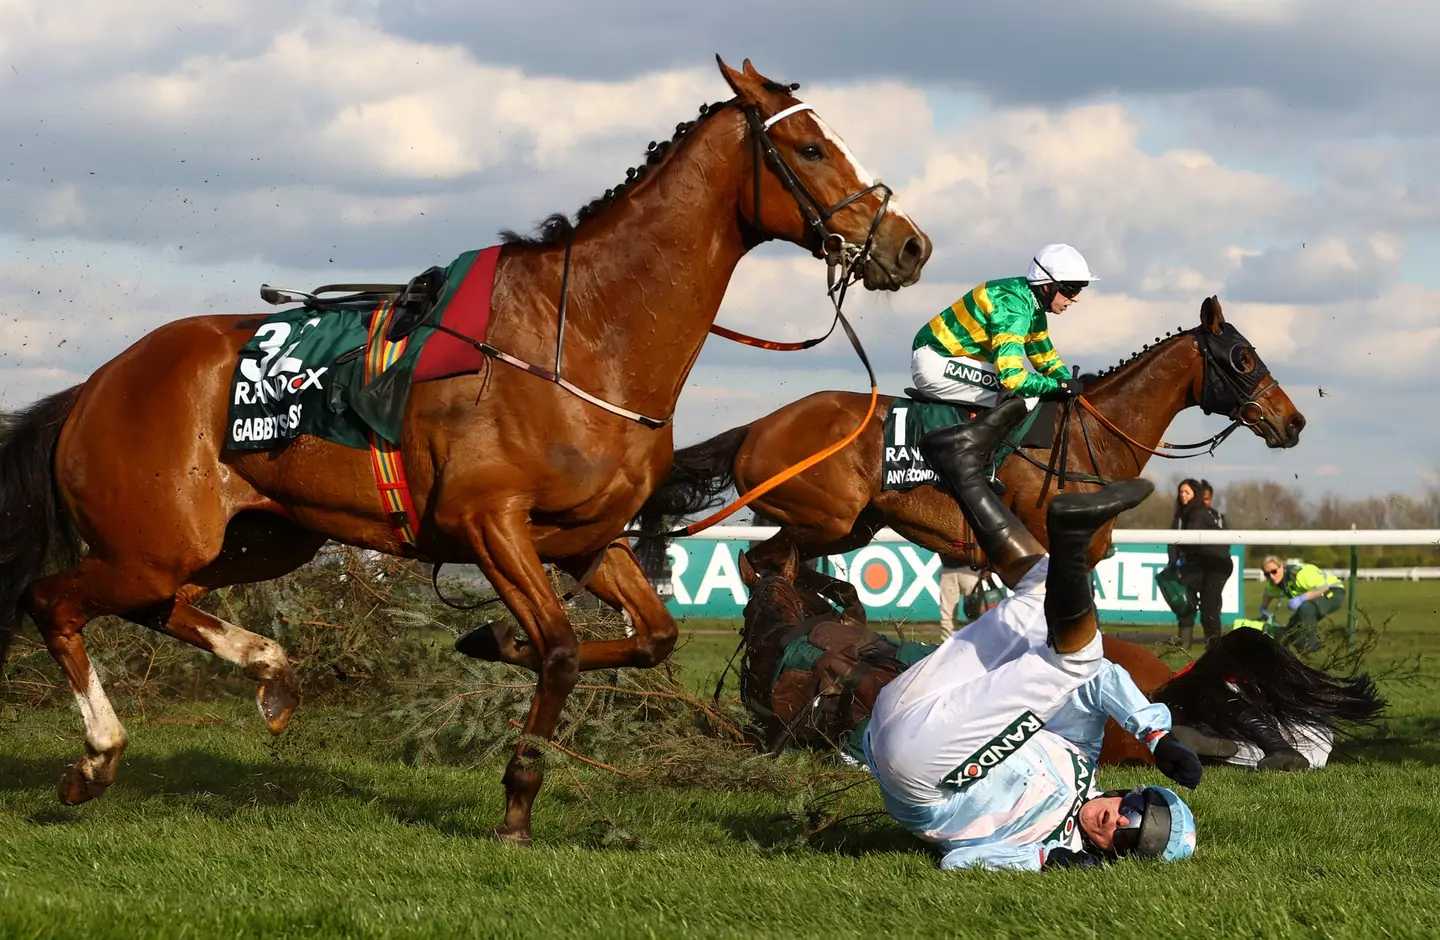 The Grand National is one of the most dangerous races in the world.